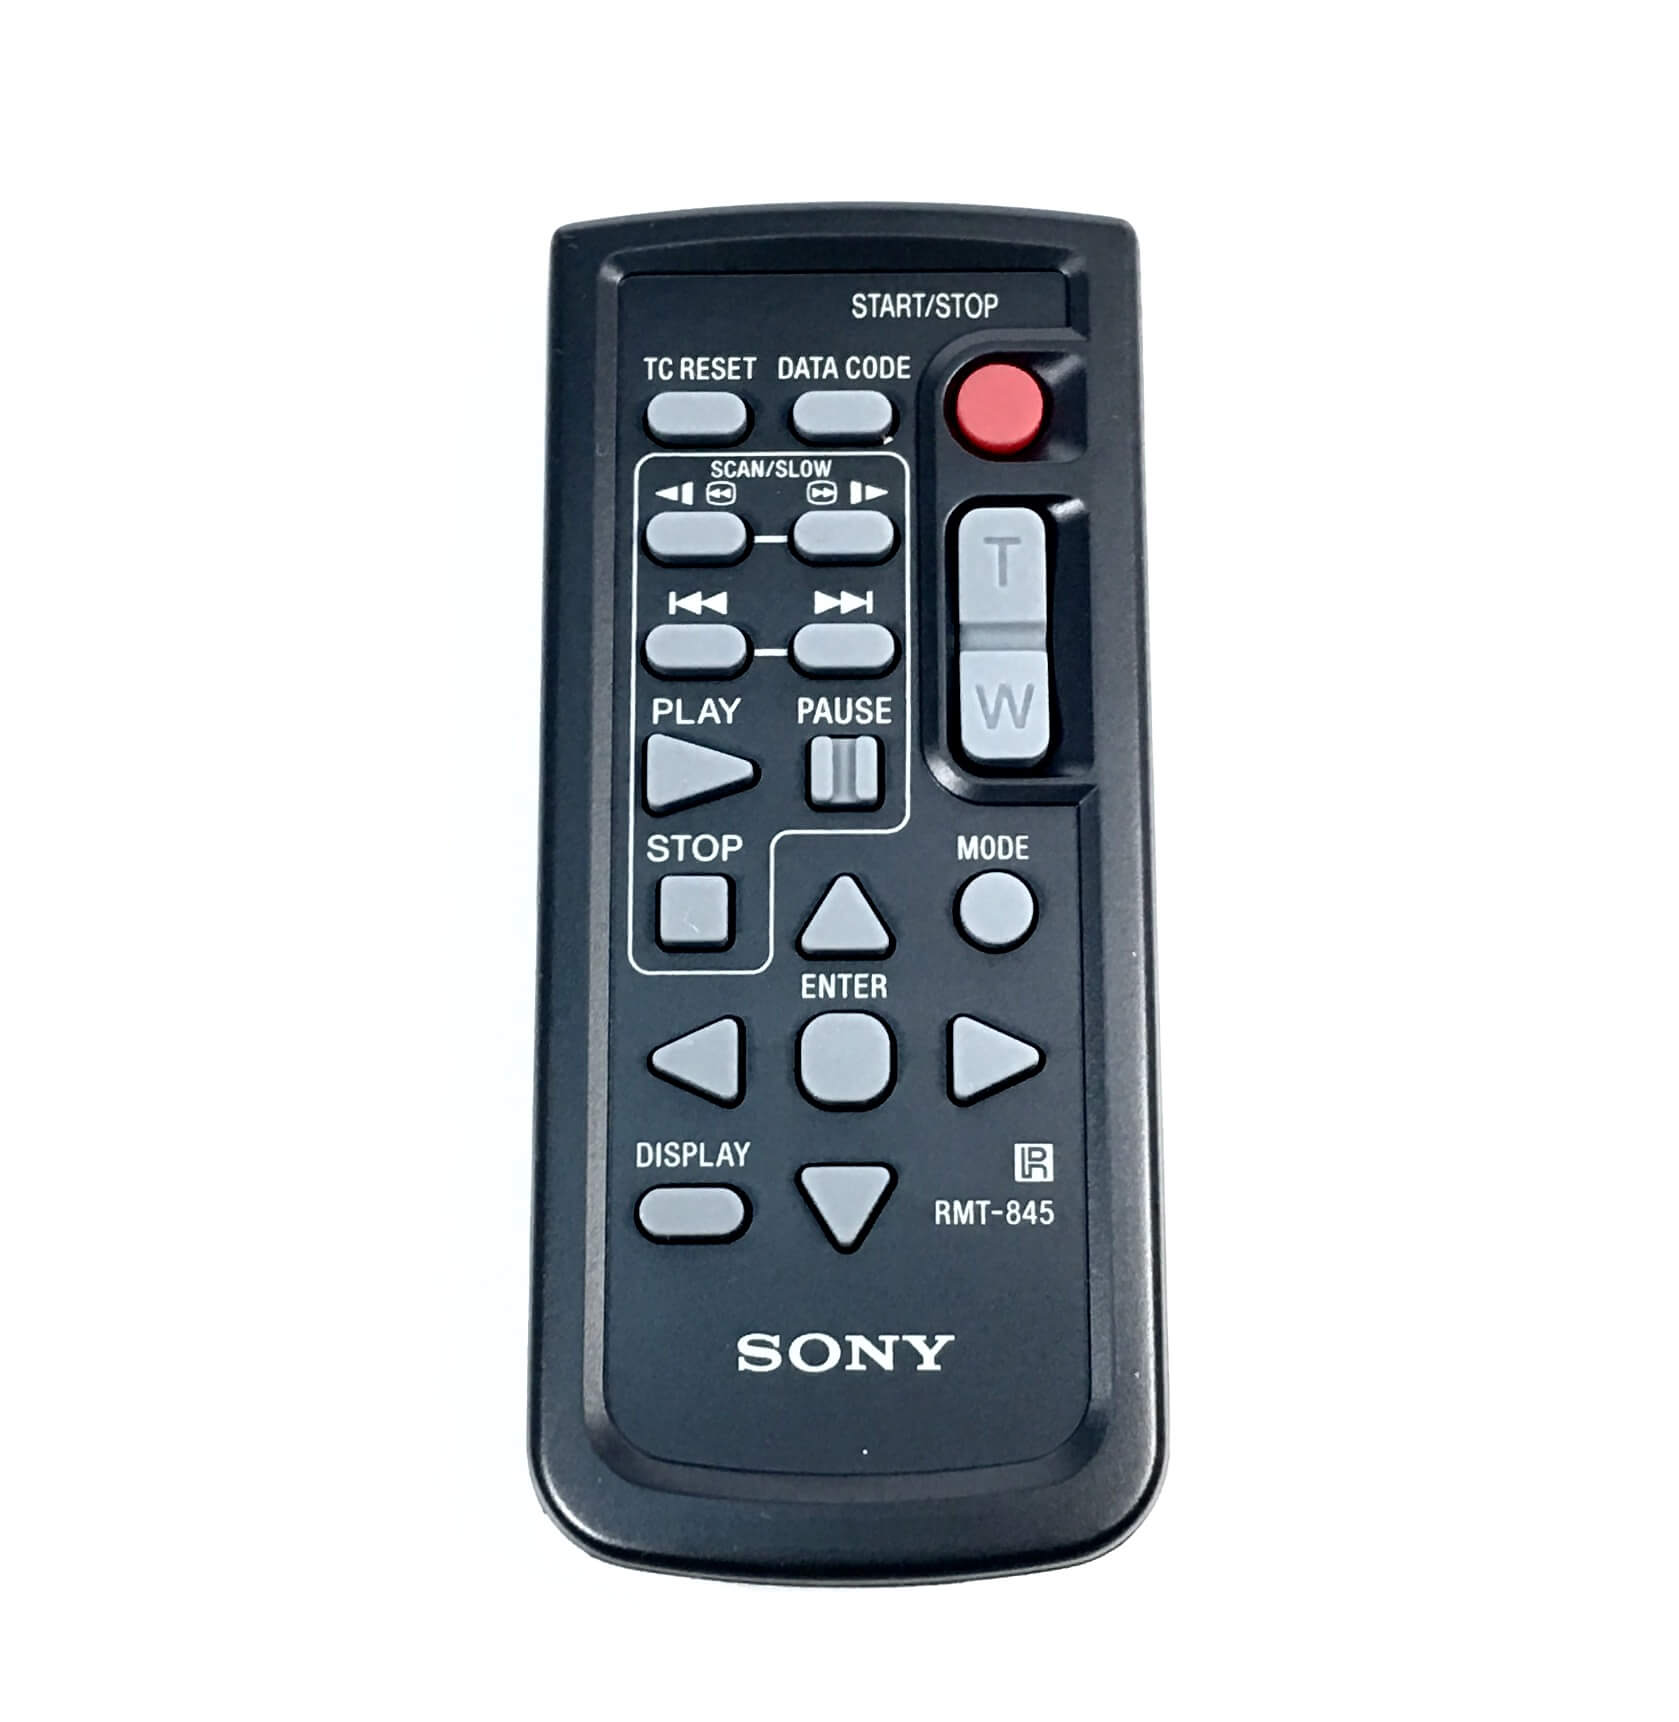 Original wireless remote control that came with the Sony NEX-FS100 camcorder. It is a genuine Sony part, sourced directly from Sony USA. Brand new factory fresh. Free Shipping.